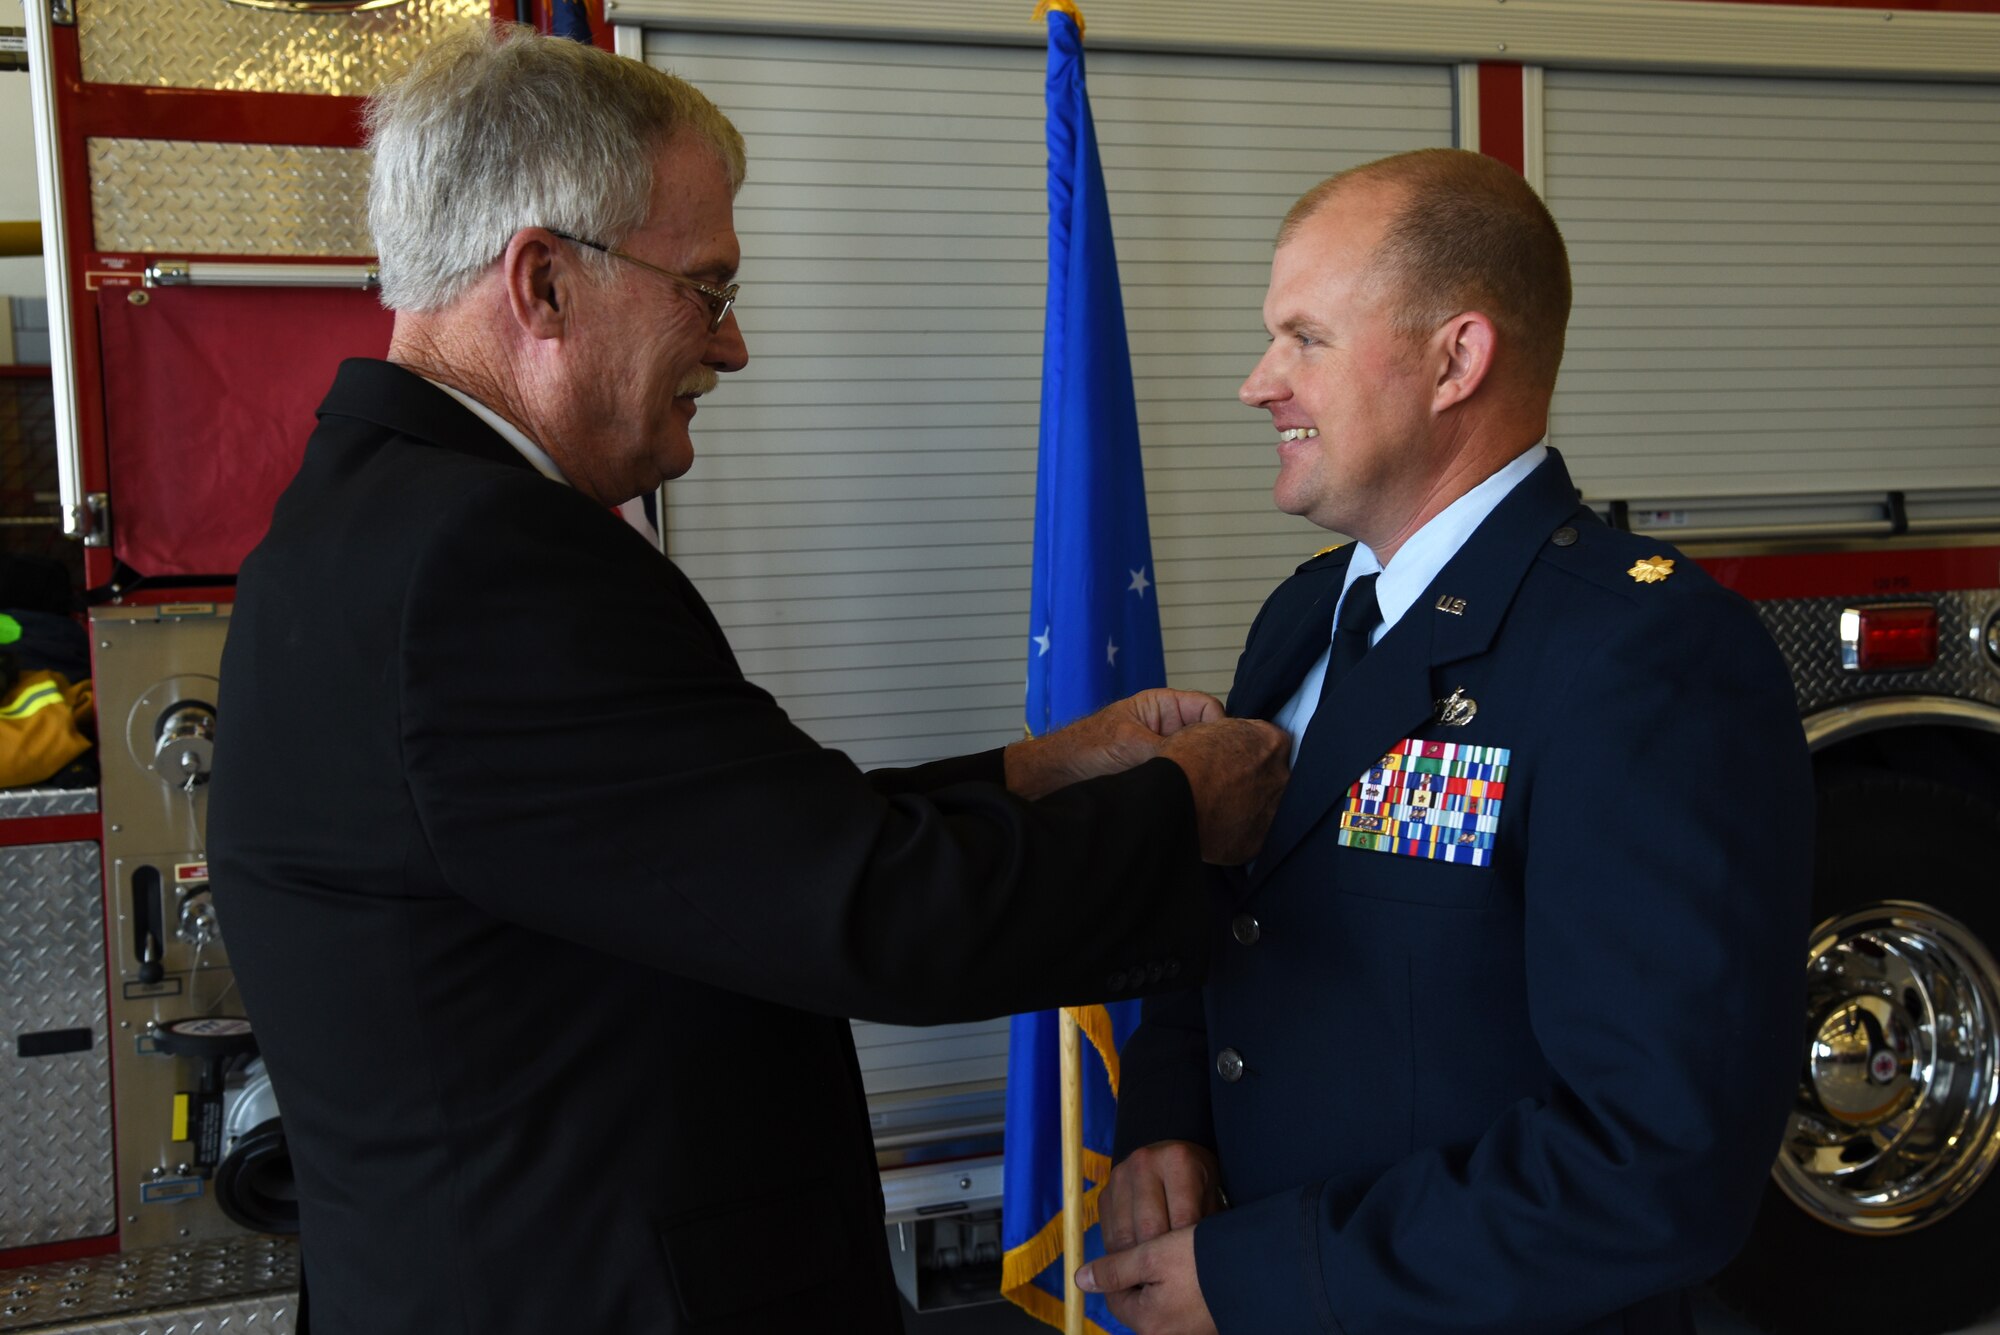 U.S. Air Force Maj. Nicholas Anderson, 17th Civil Engineer Squadron commander, receives his commander’s pin from his father during the 17th CES Assumption of Command at the fire department on Goodfellow Air Force Base, Texas, June 22, 2018. The pin signifies that individual holds the position of commander of a squadron, group, wing or major command. (U.S. Air Force photo by Staff Sgt. Joshua Edwards/Released)